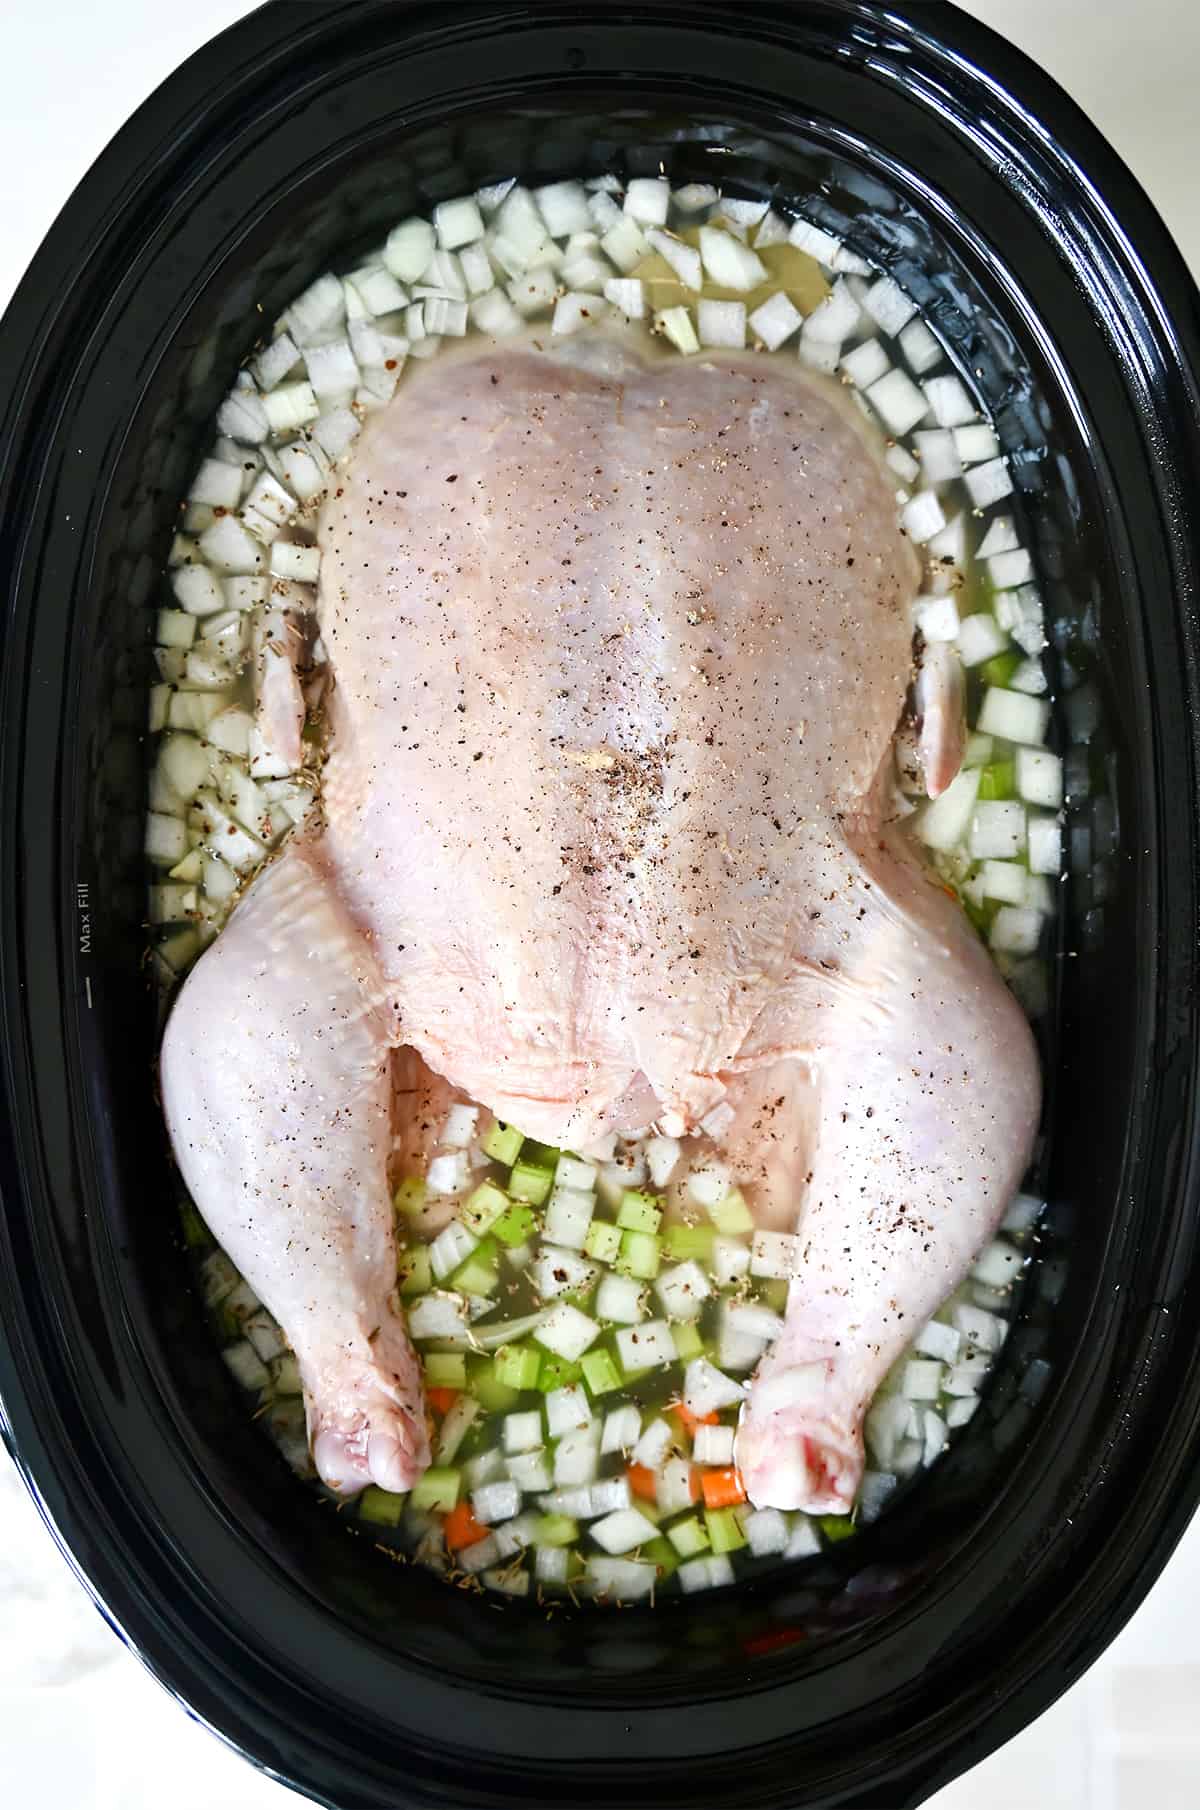 A whole roasting chicken in a slow cooker with diced veggies and broth.